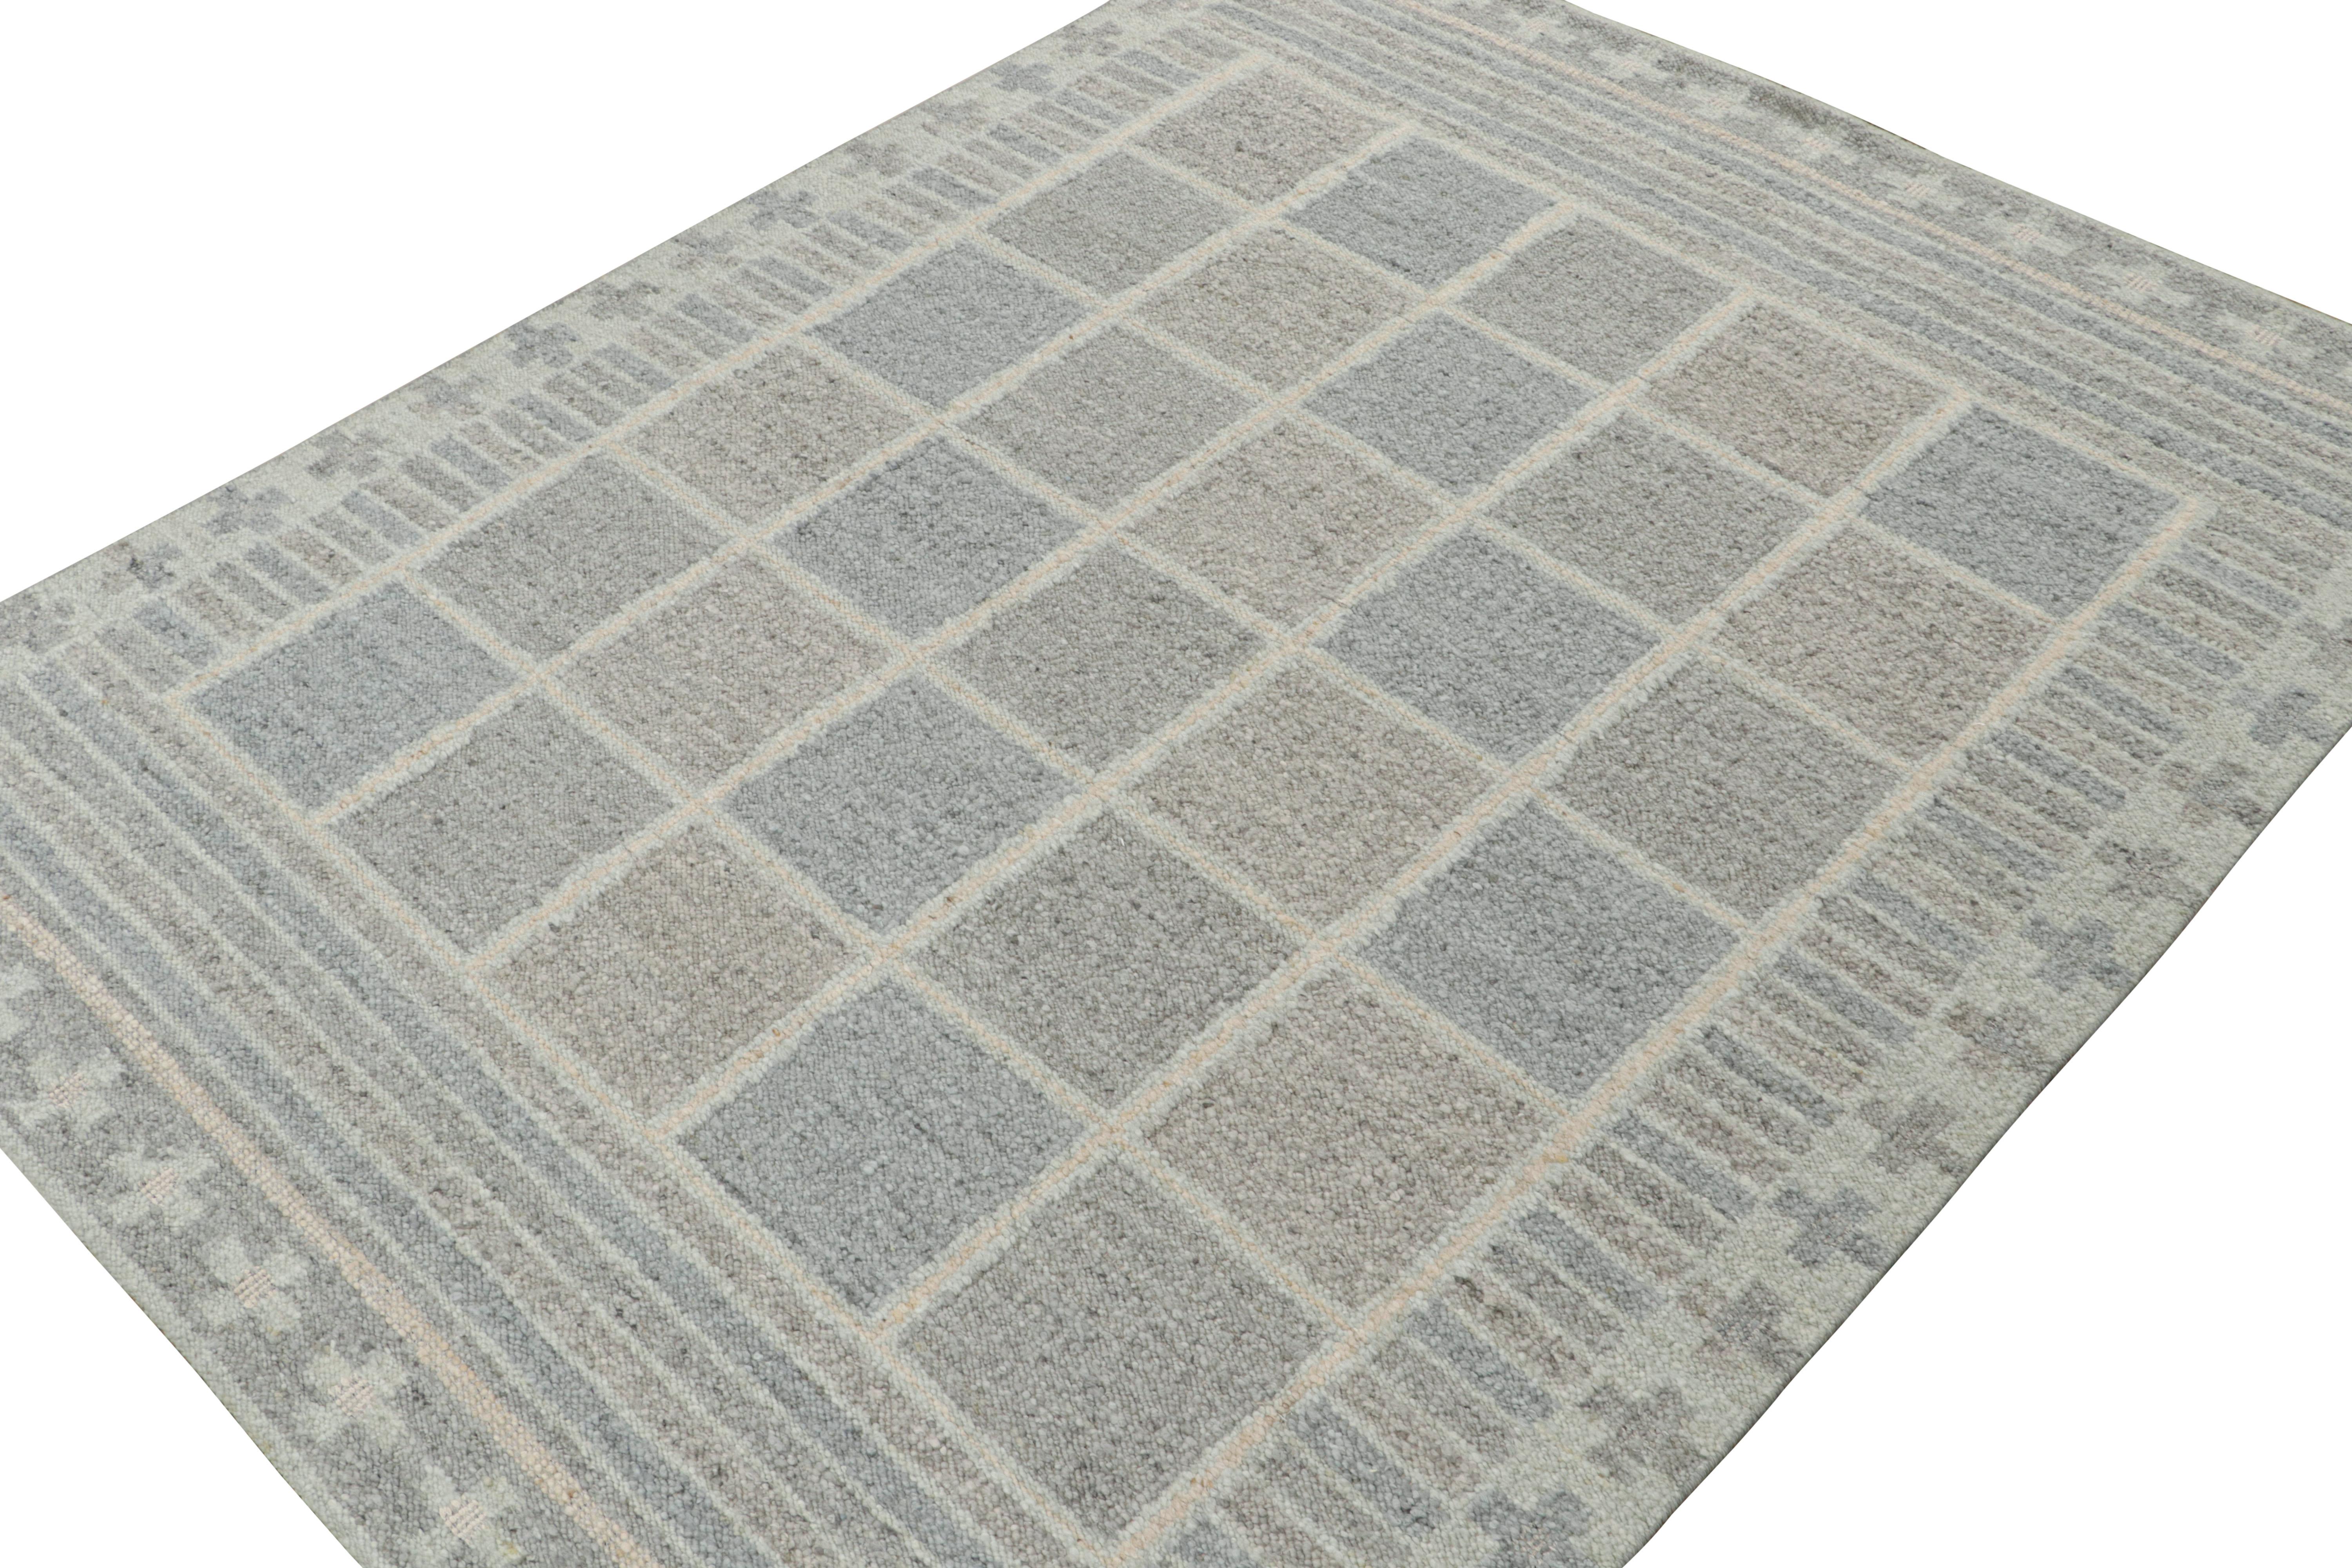 Indian Rug & Kilim’s Scandinavian Style Kilim in Blue & Gray Geometric Patterns For Sale